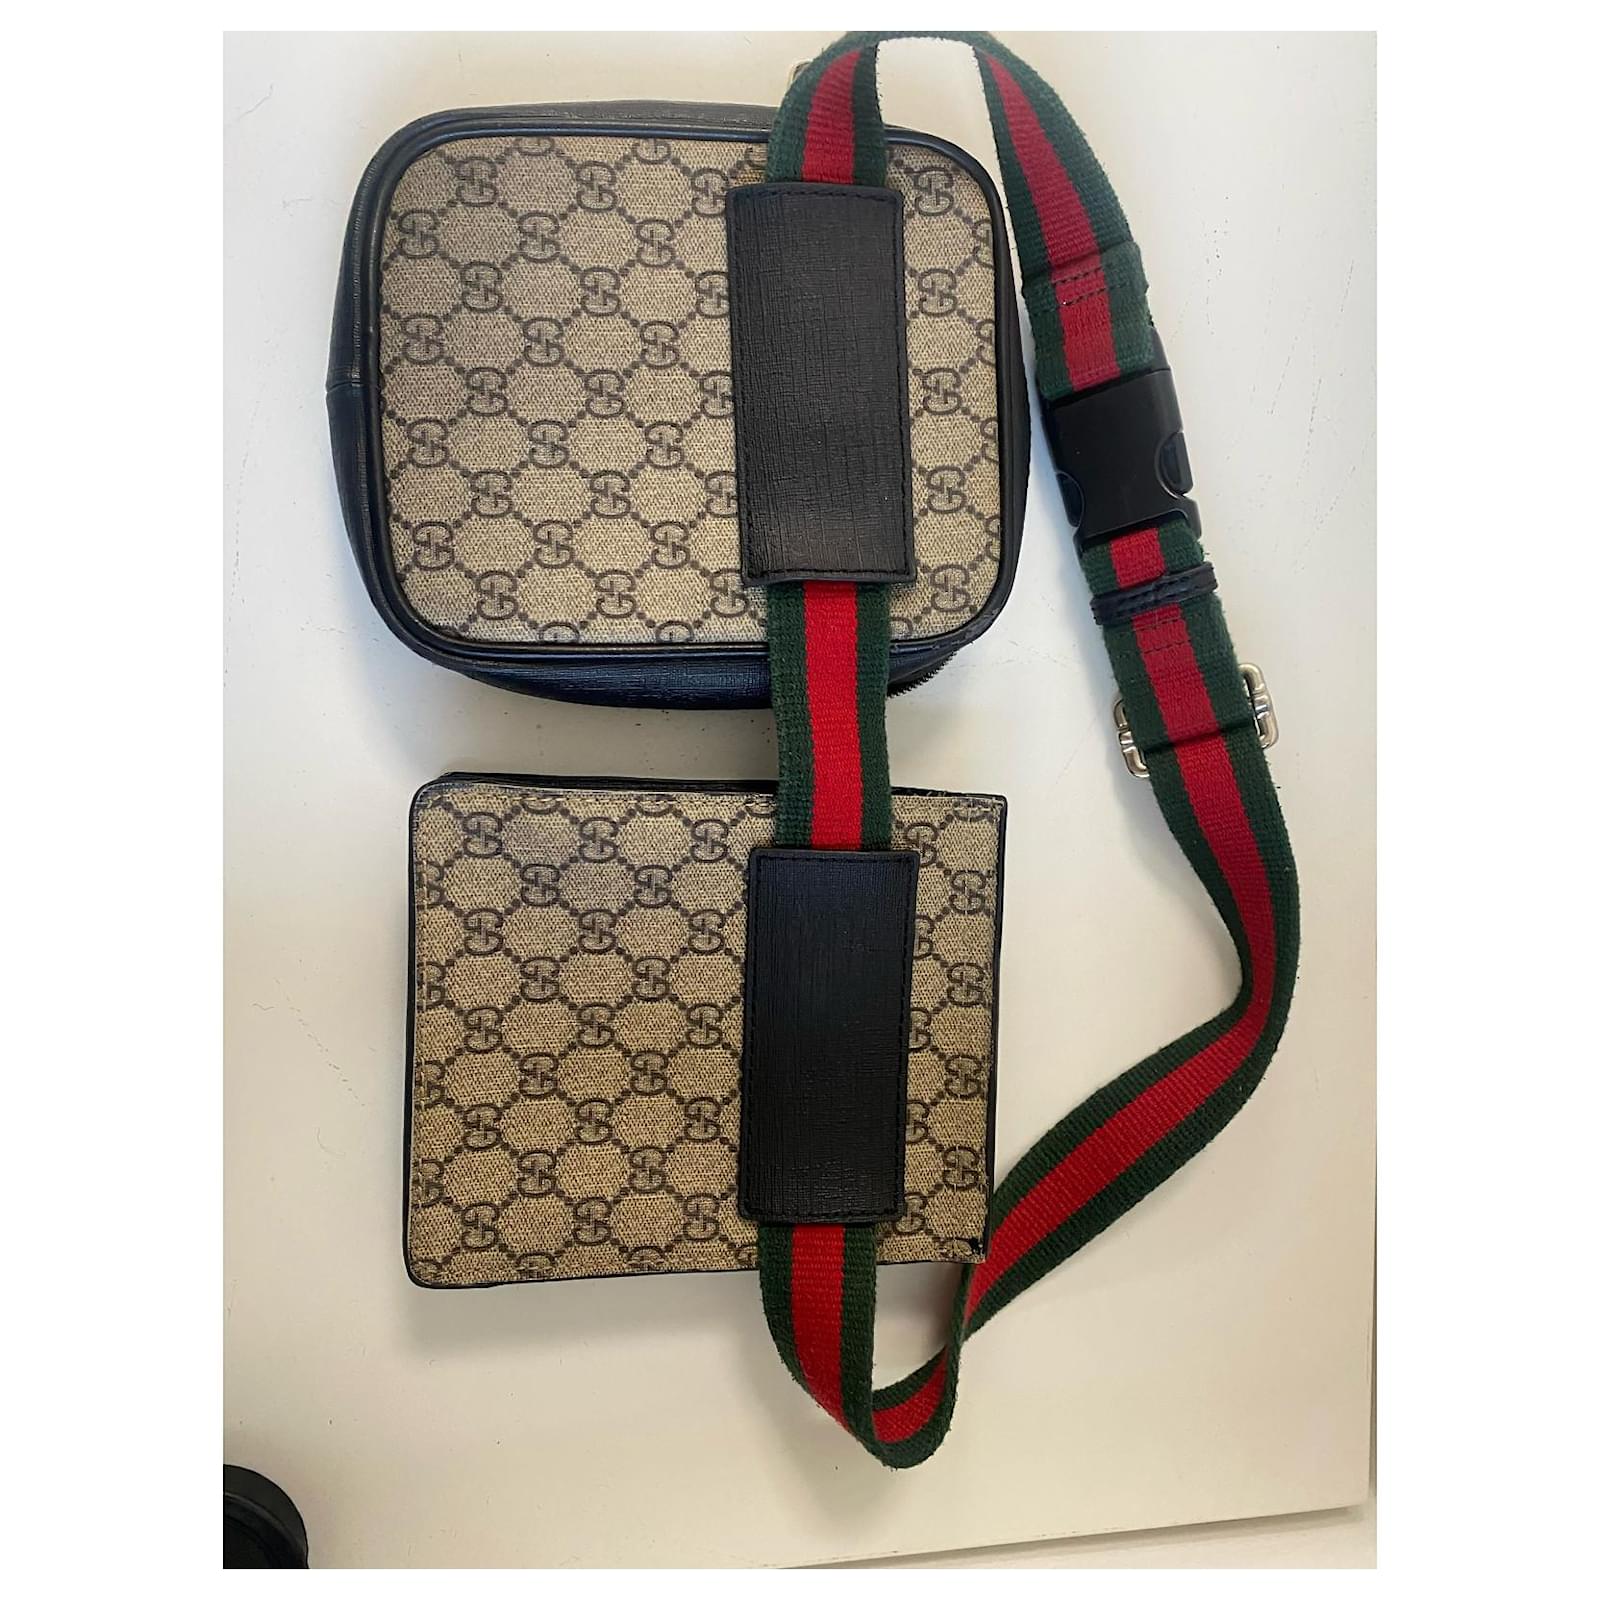 Gucci GG Messenger Bag in Very Good Condition 449172 -  Norway